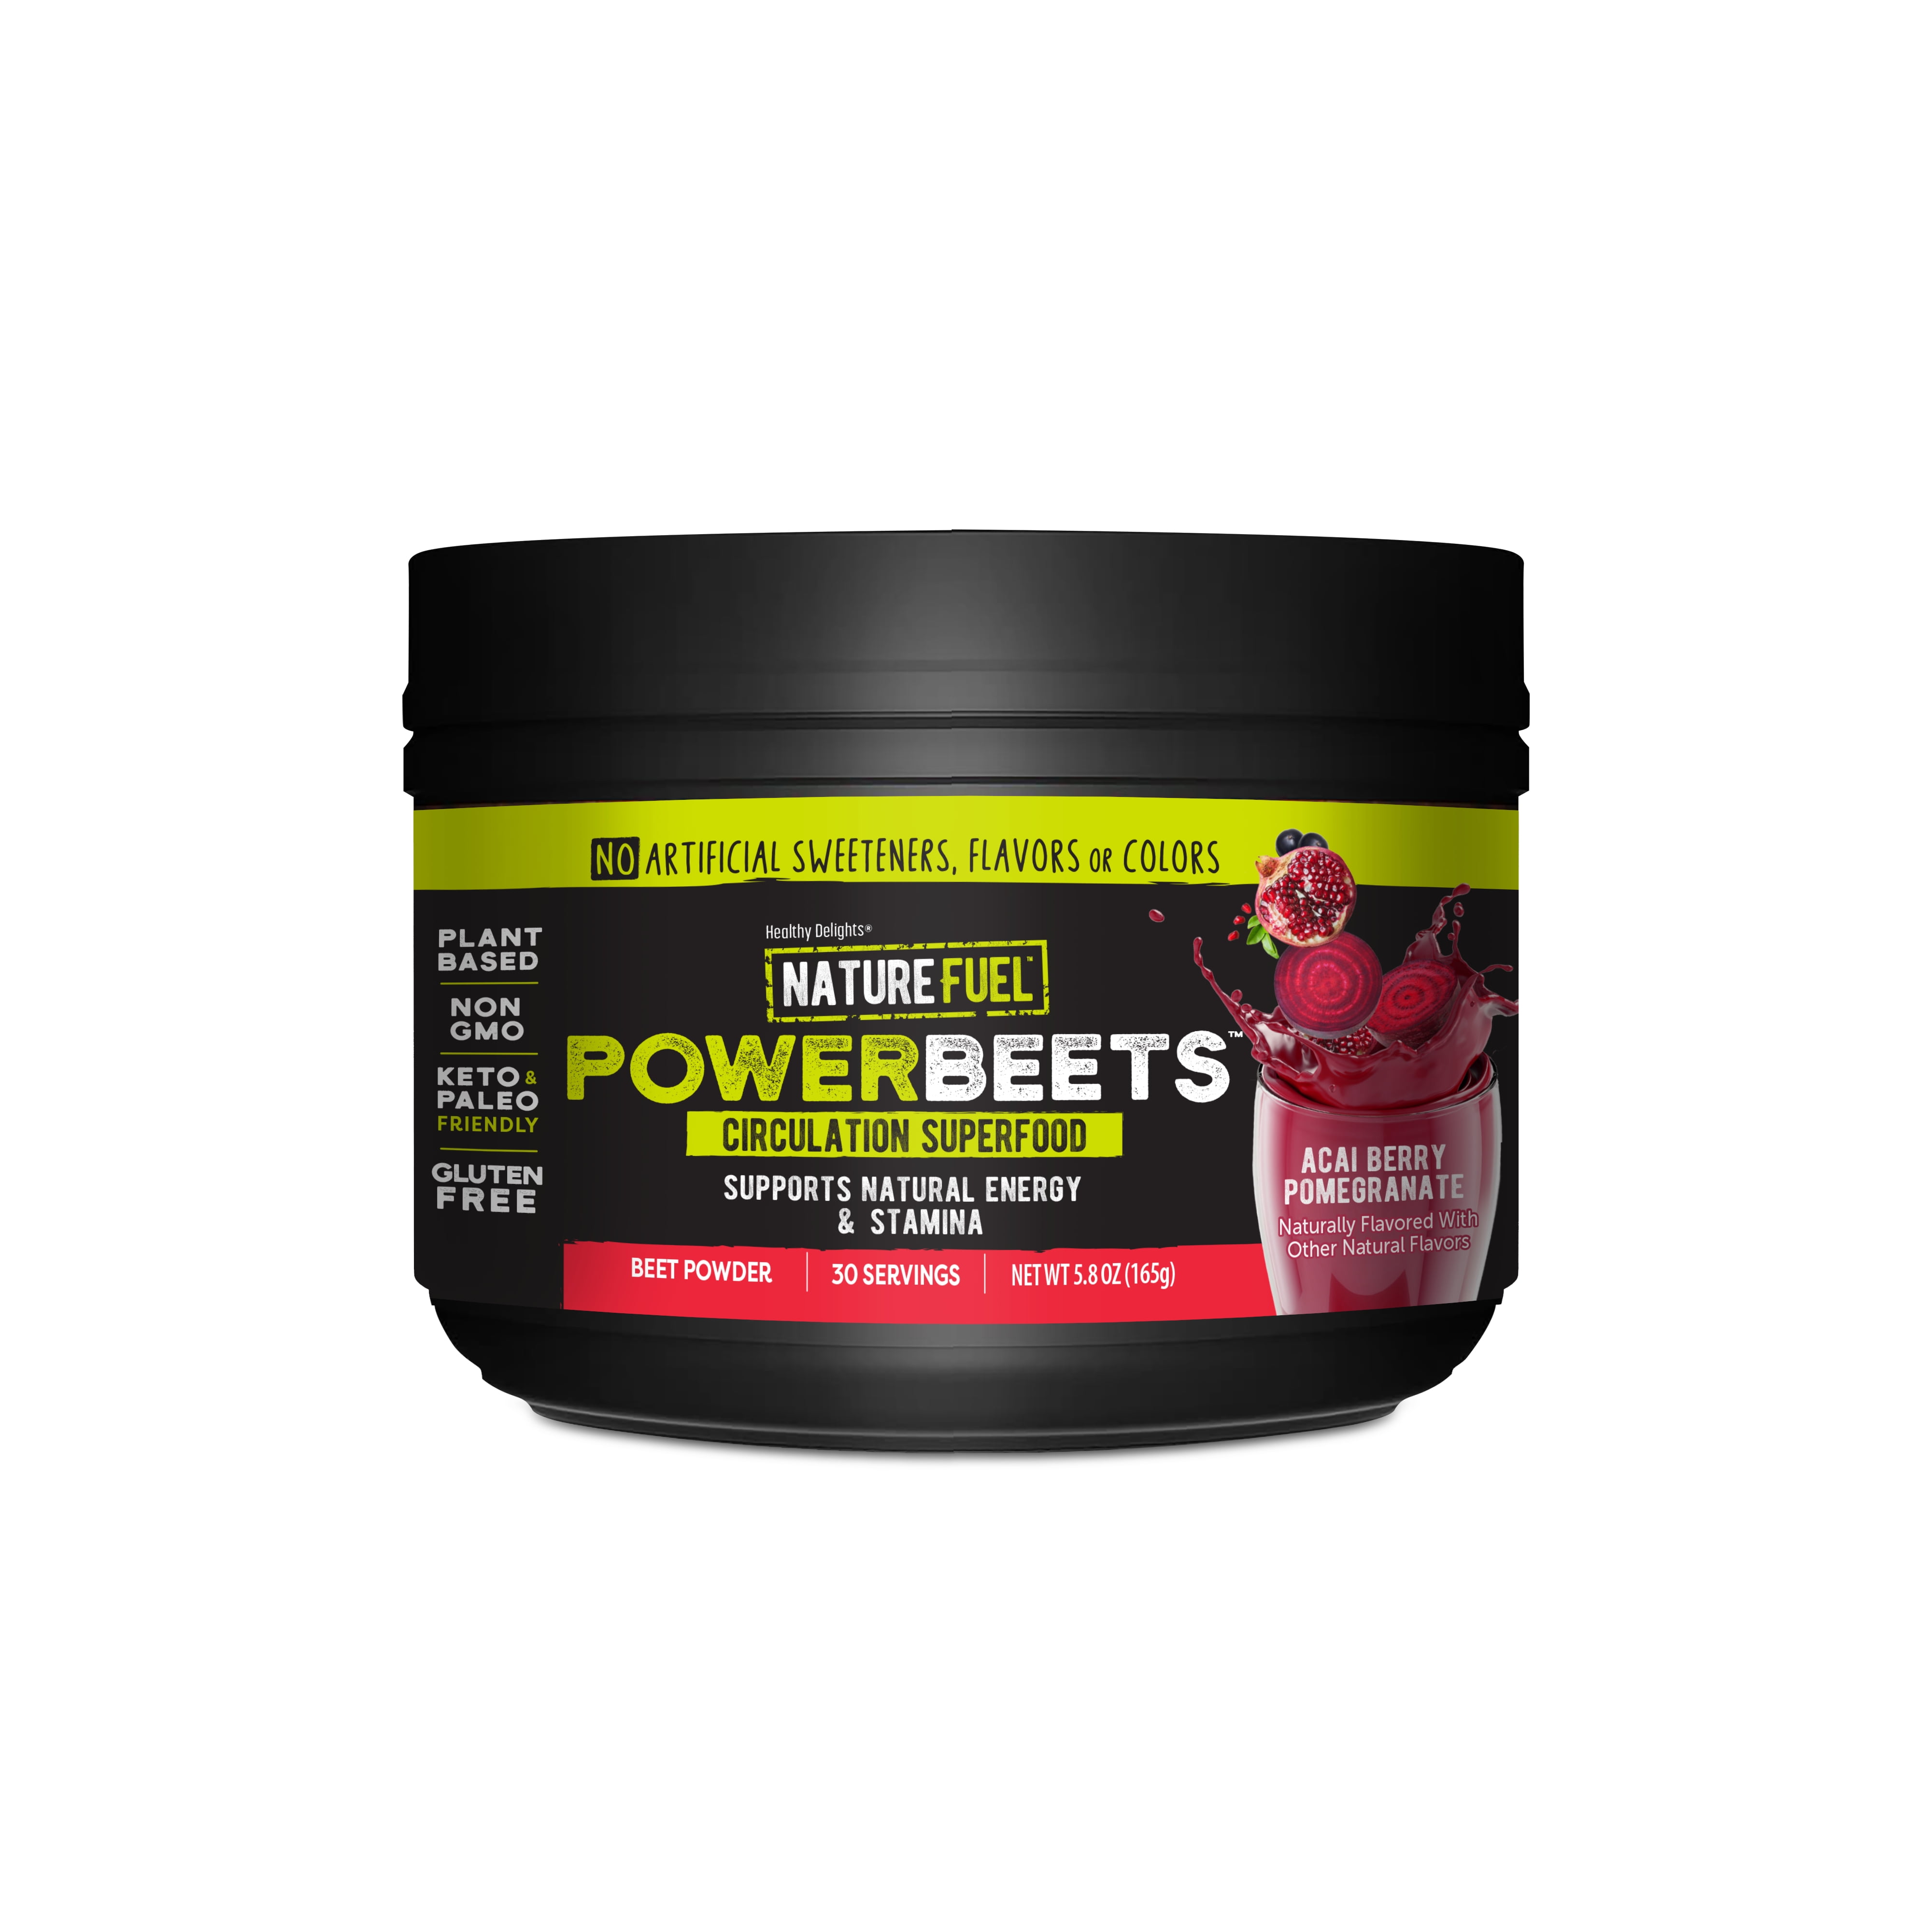 Healthy Delights Nature Fuel, Power Beets, Beet Juice Powder, Acai Berry Pomegranate, 5.8 oz